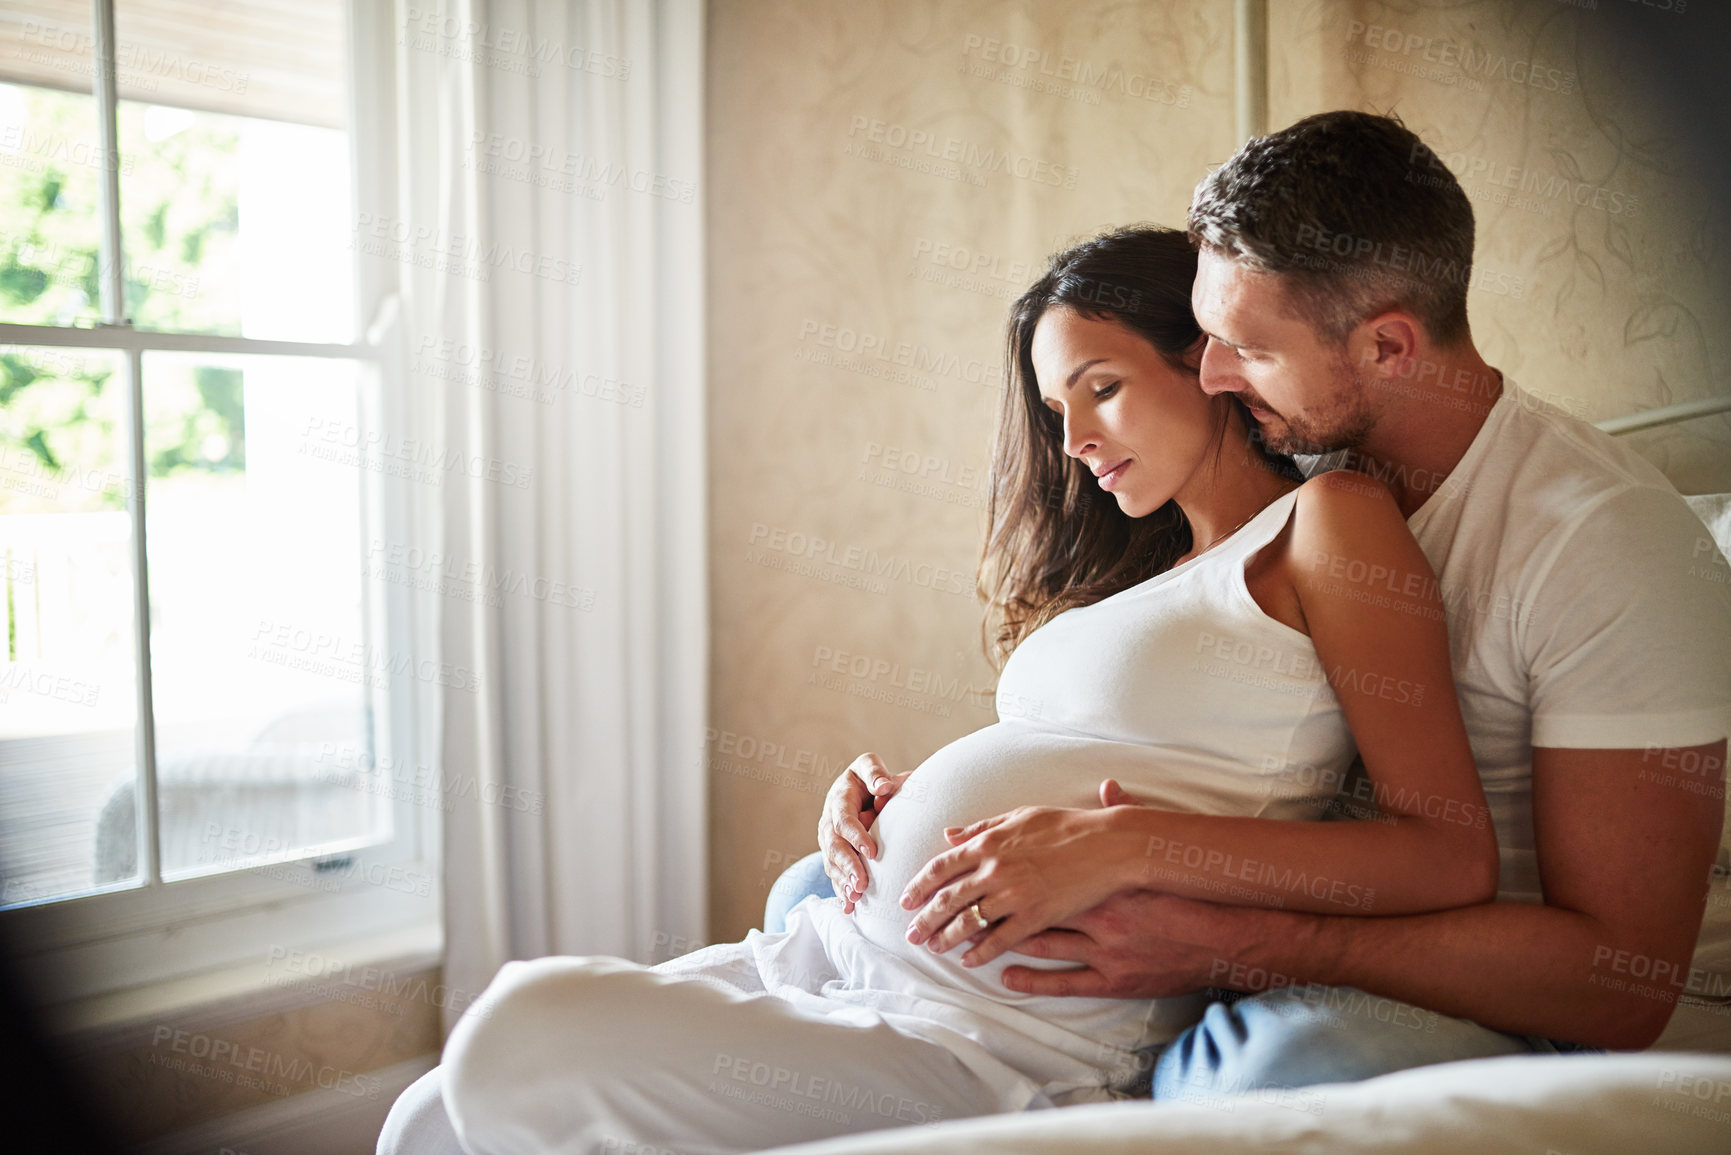 Buy stock photo Shot of a husband and pregnant wife sitting together in a bedroom